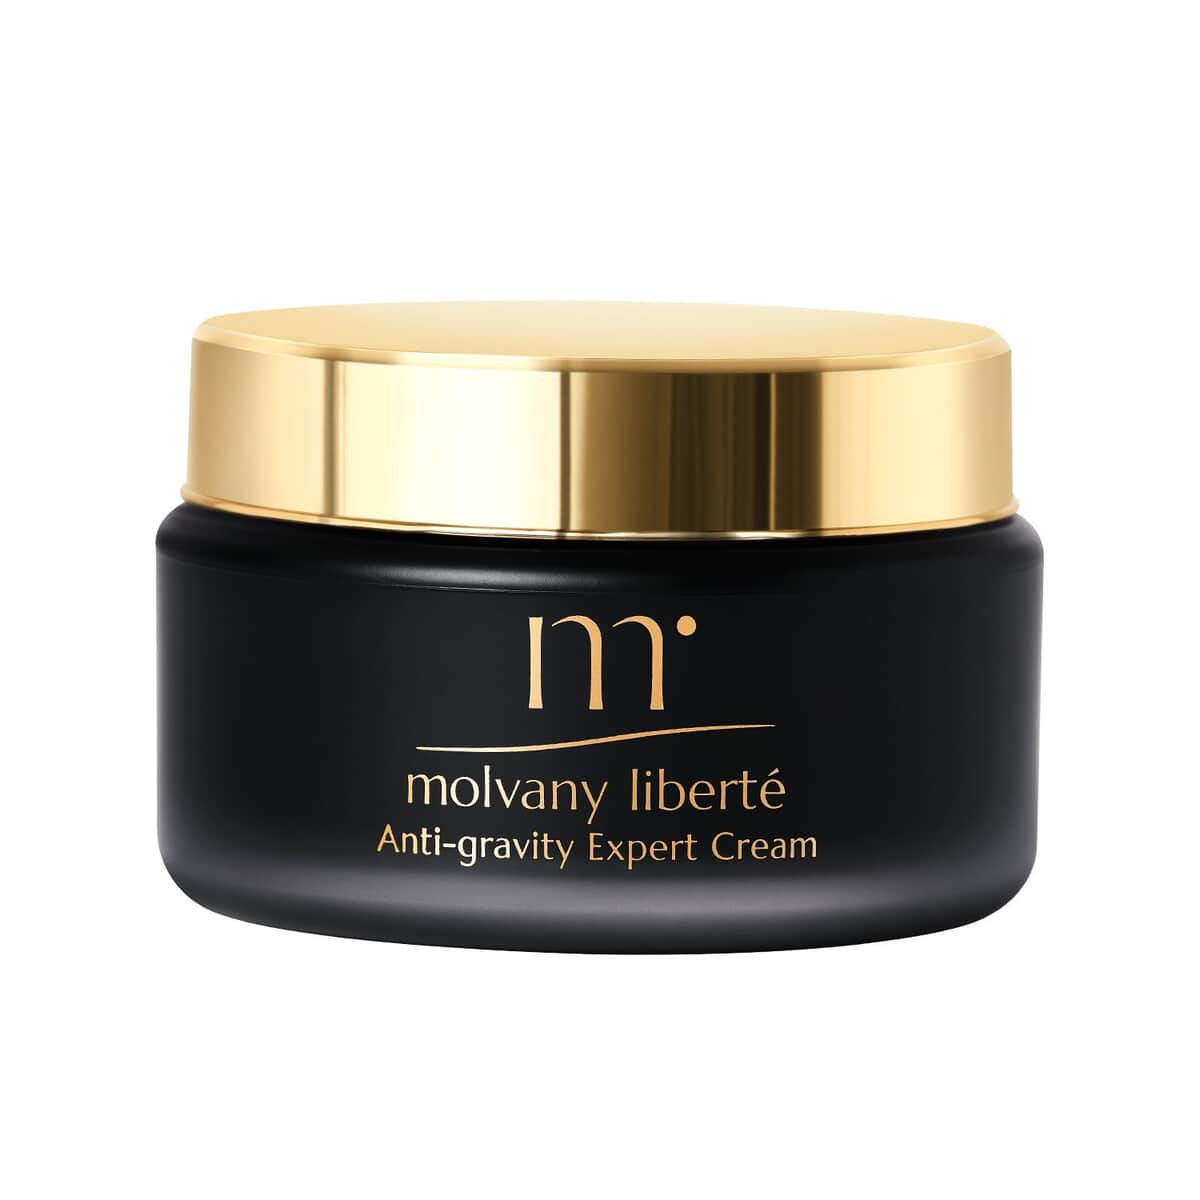 molvany liberte Sculpting Expert Cream (Ships in 8-10 Business Days) image number 0